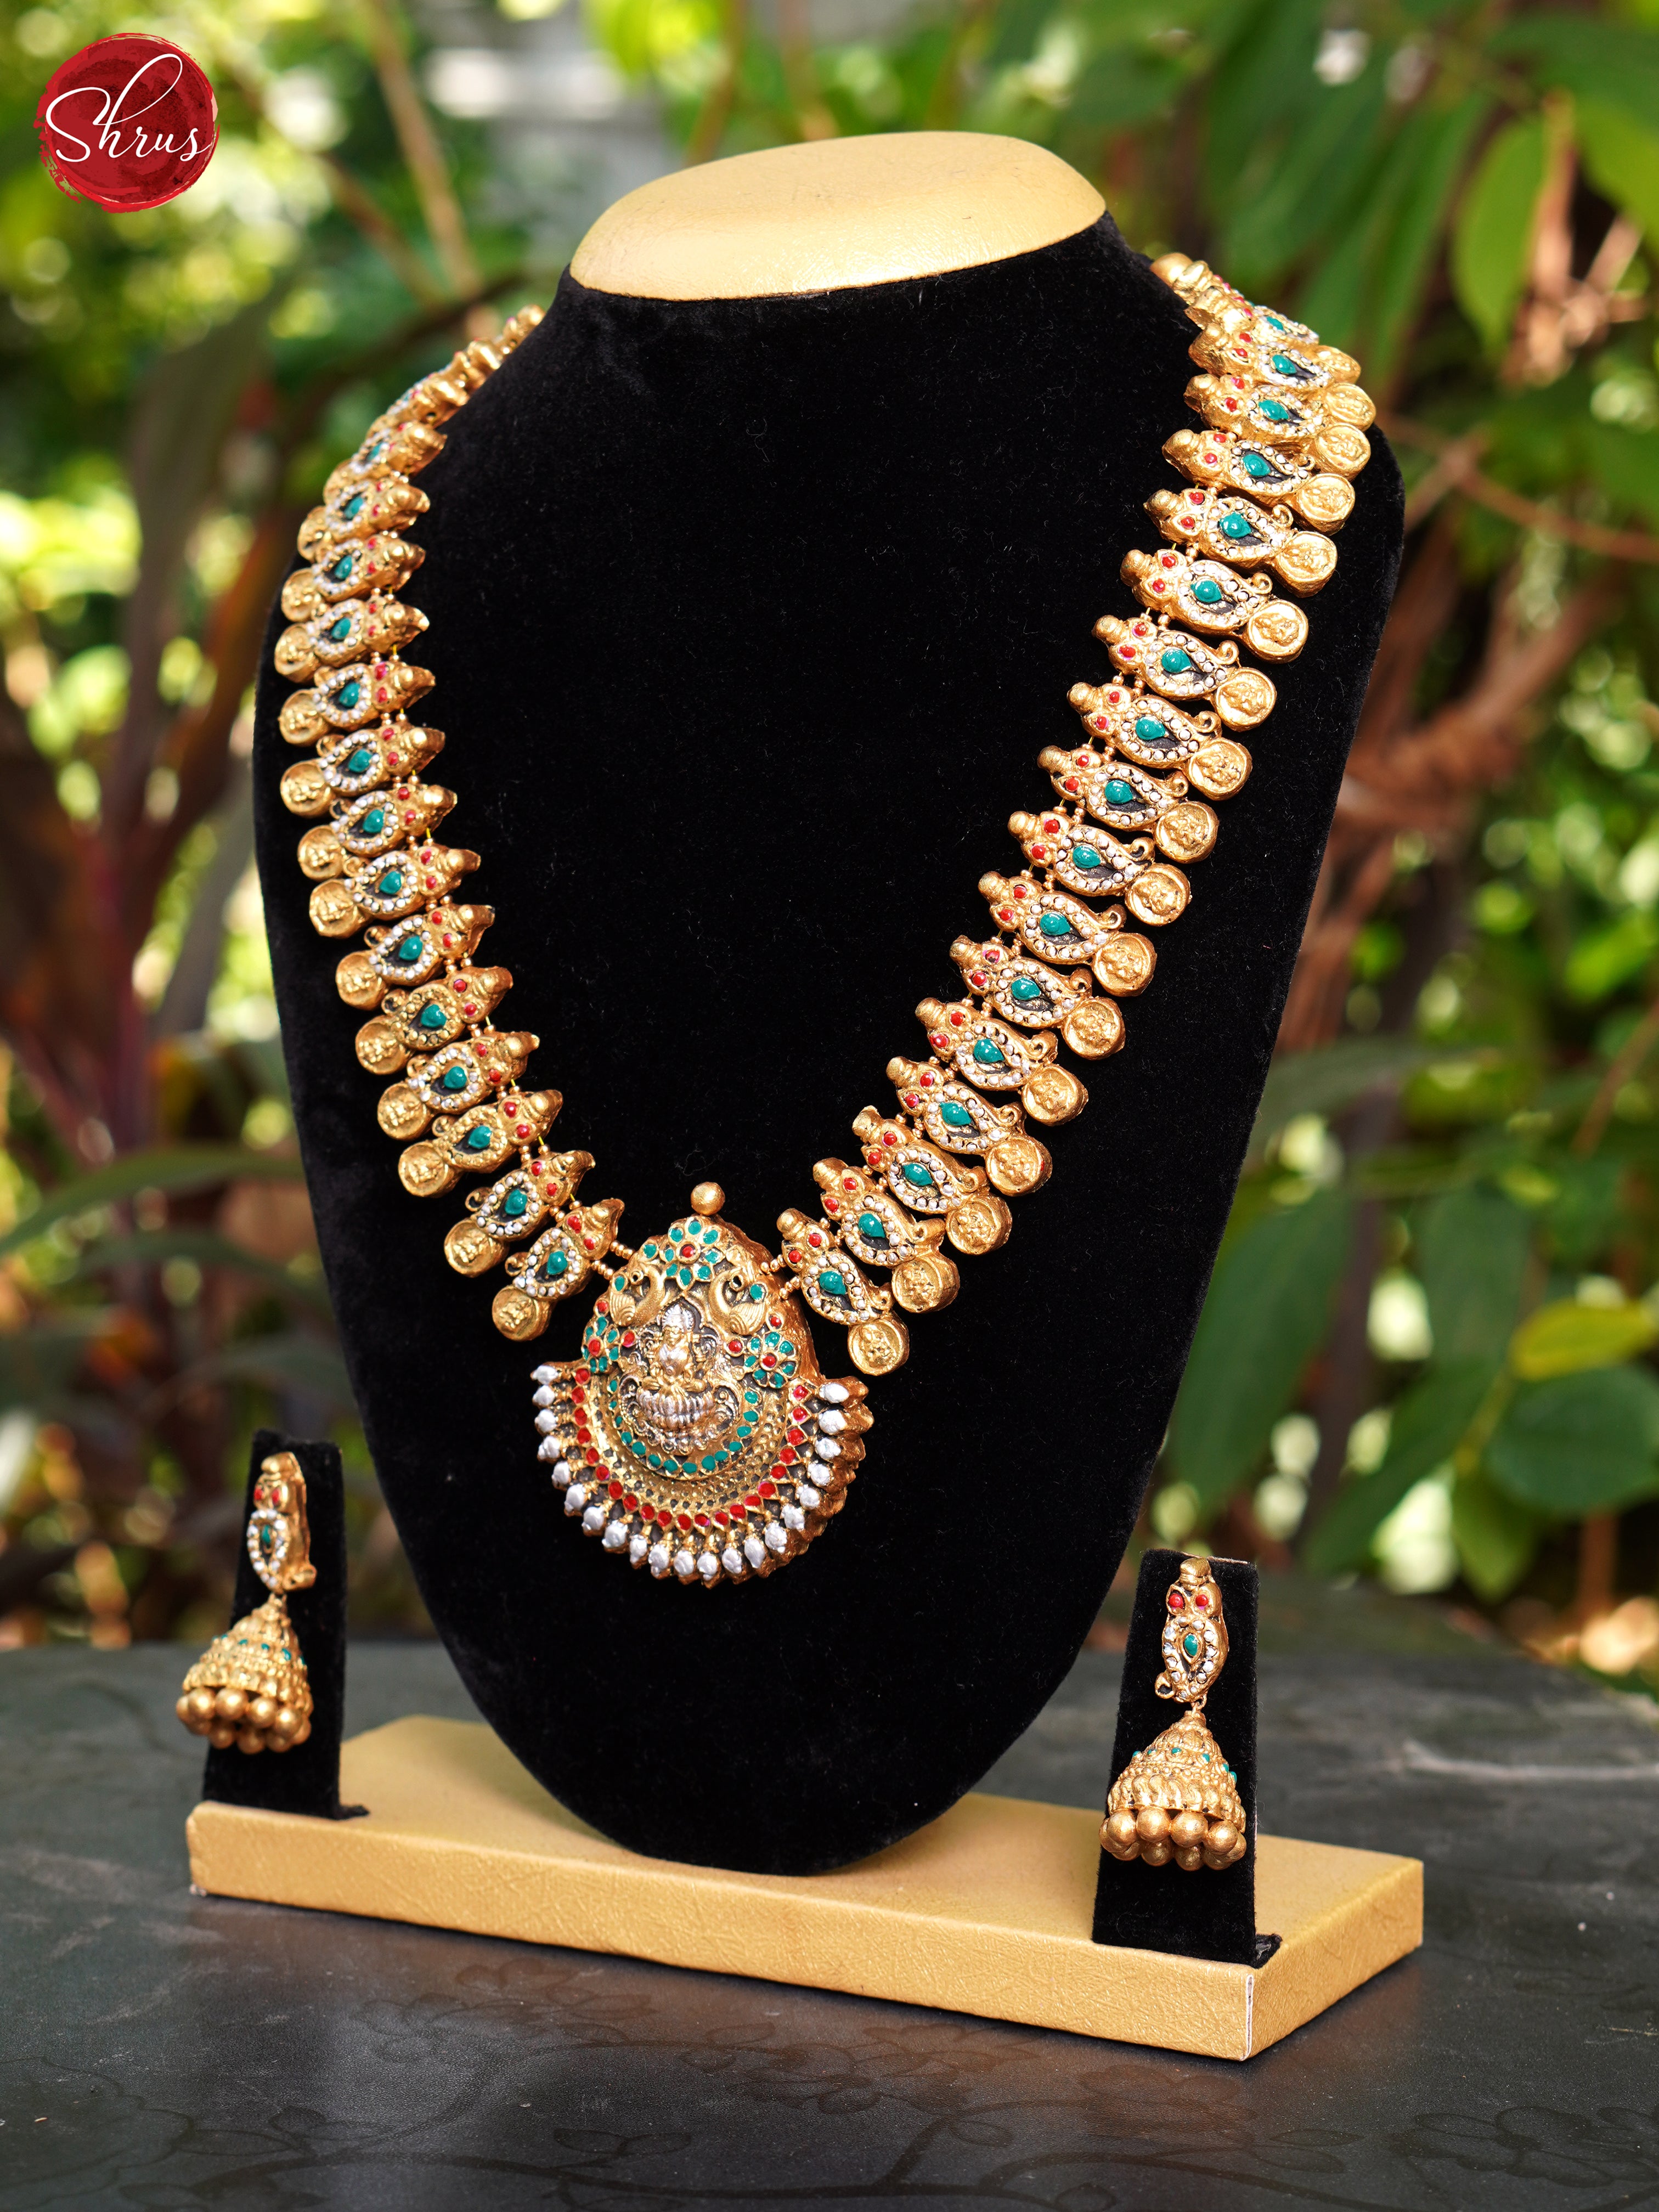 Handcrafted Lakshmi pendant  Terracotta Necklace with Jhumkas- Accessories - Shop on ShrusEternity.com